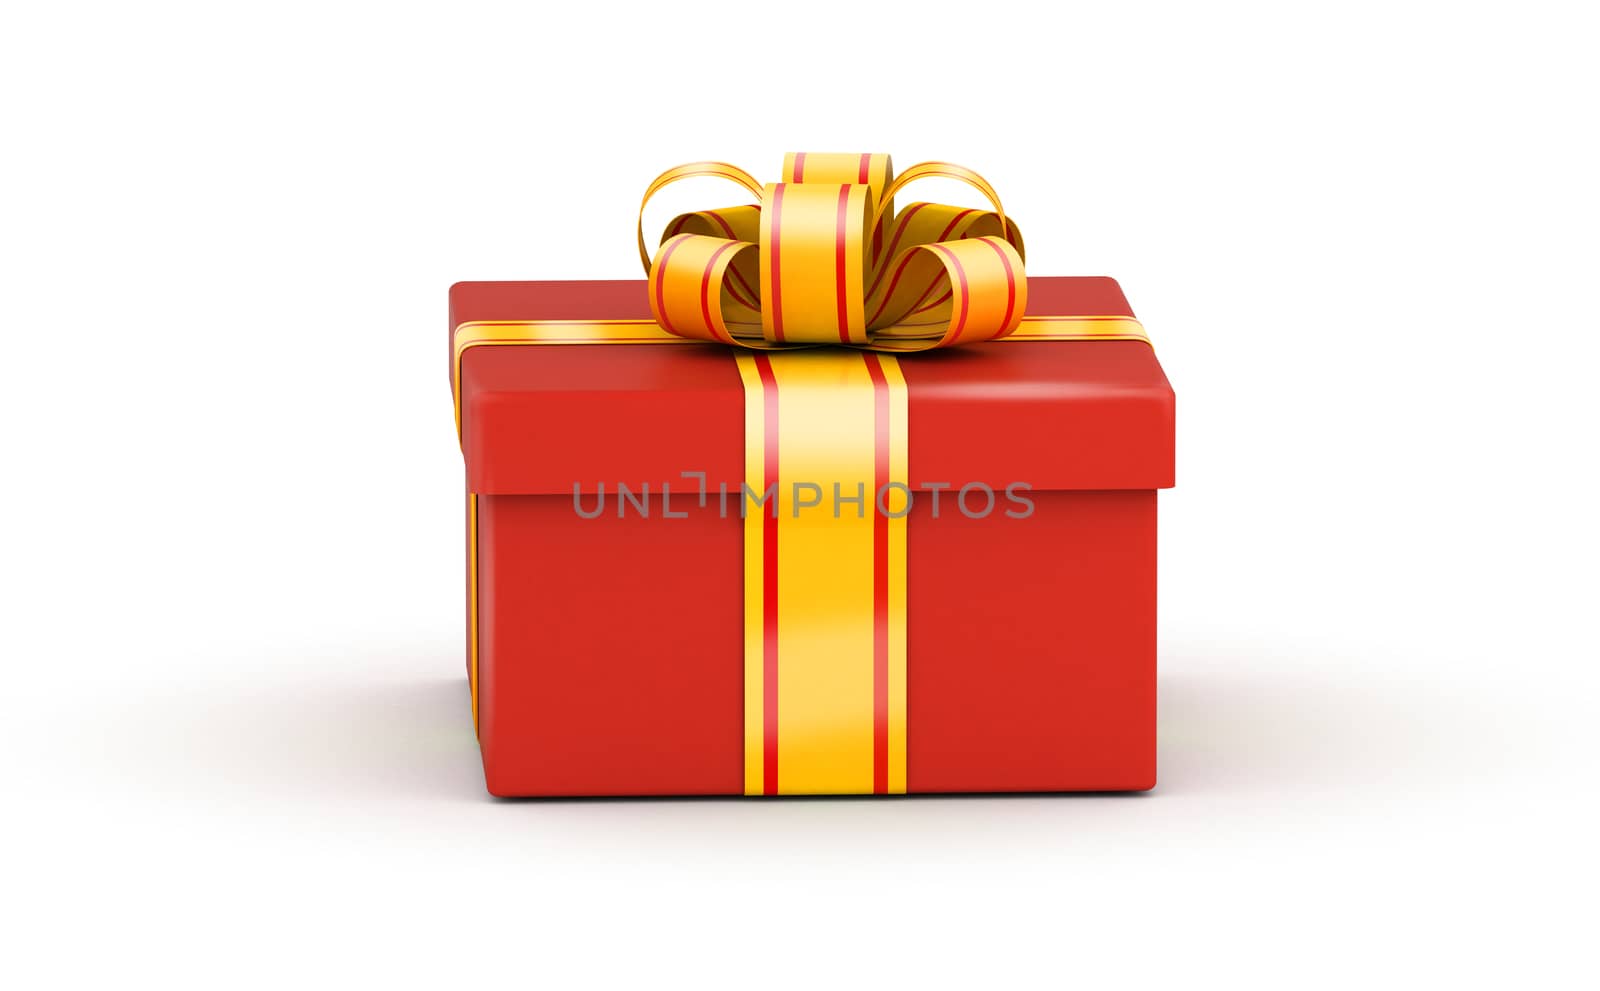 Sqaure red gift box by iunewind